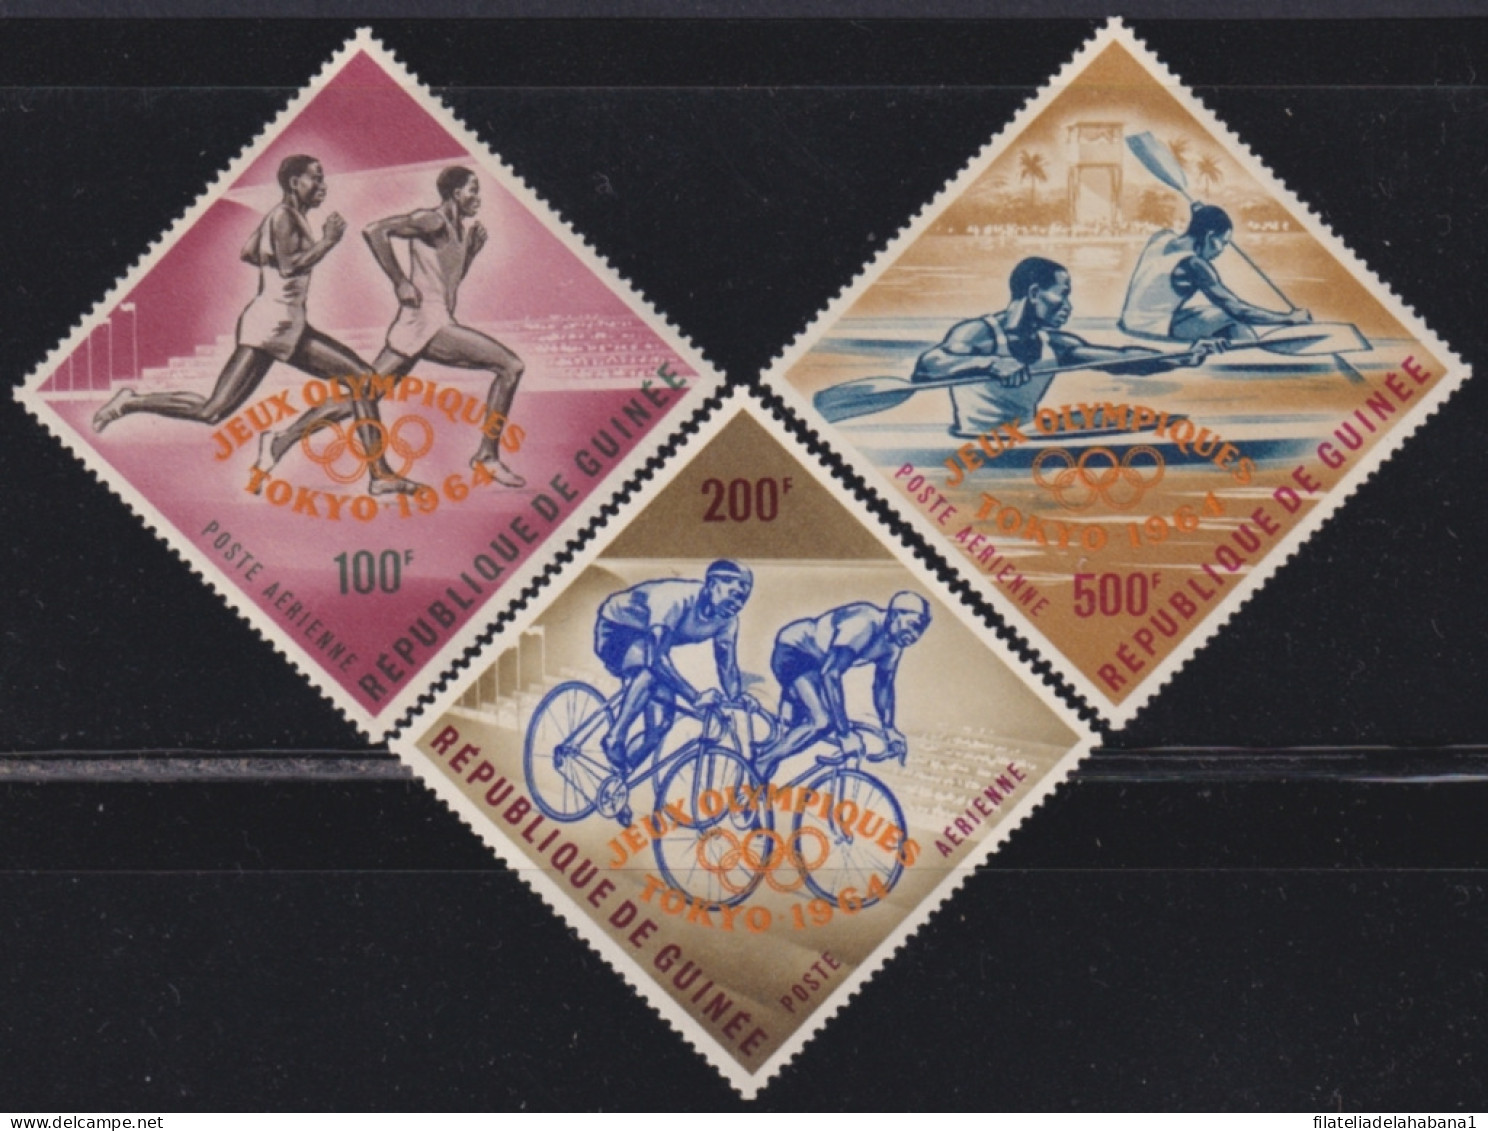 F-EX49269 GUINEE GUINEA MNH 1968 TOKIO OLYMPIC GAMES OVERPRINT CICLYNG ATHLETISM.  - Zomer 1968: Mexico-City